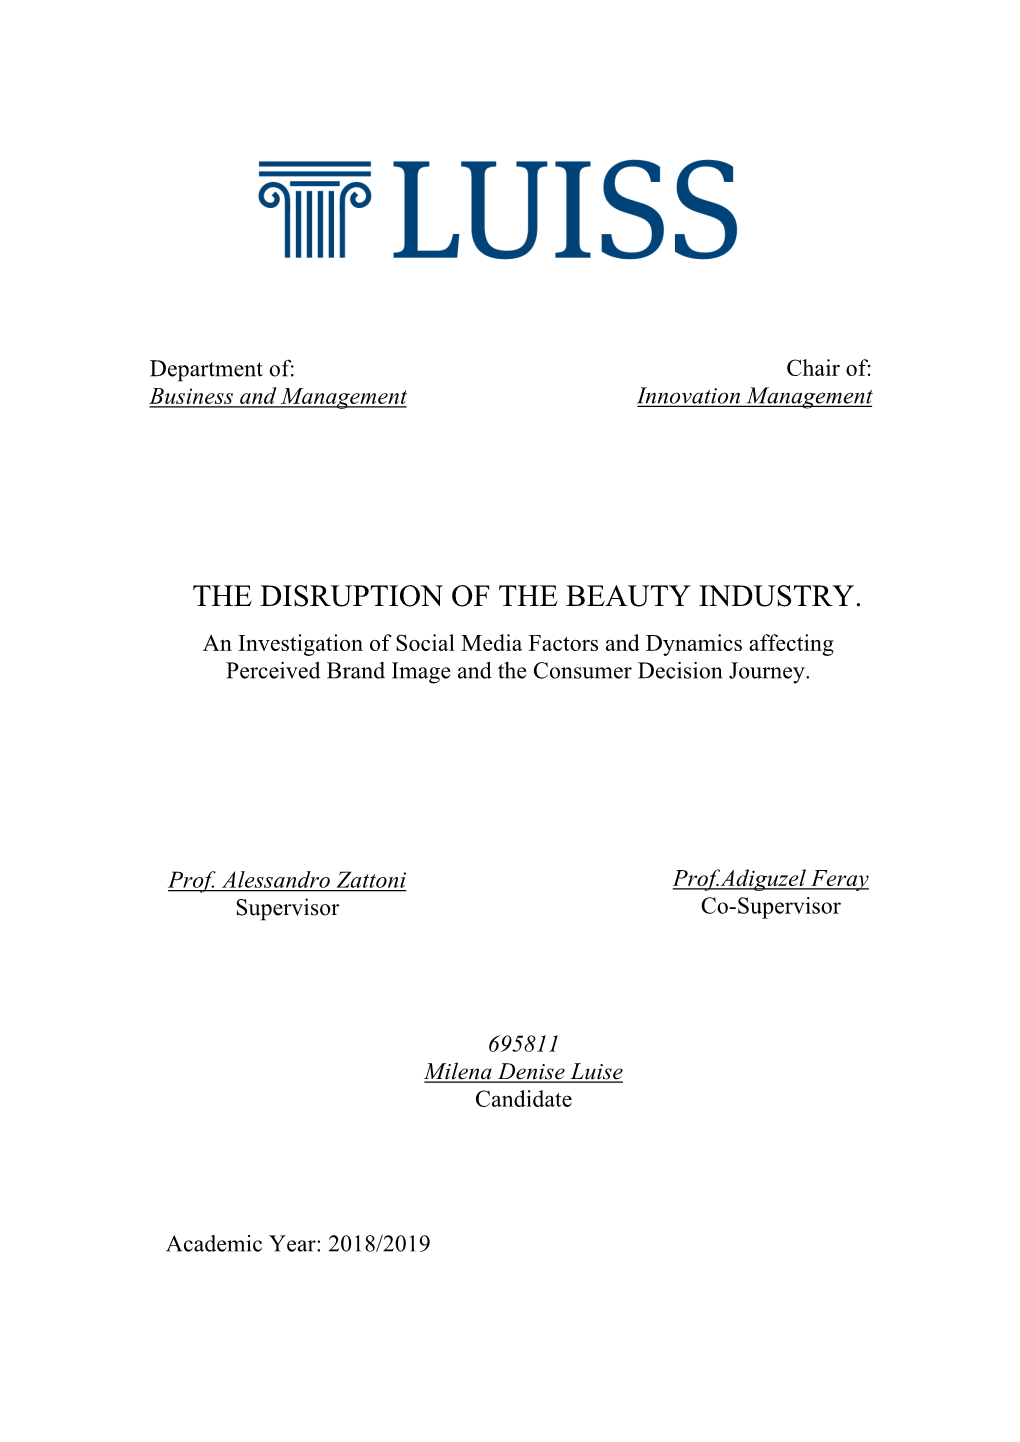 The Disruption of the Beauty Industry